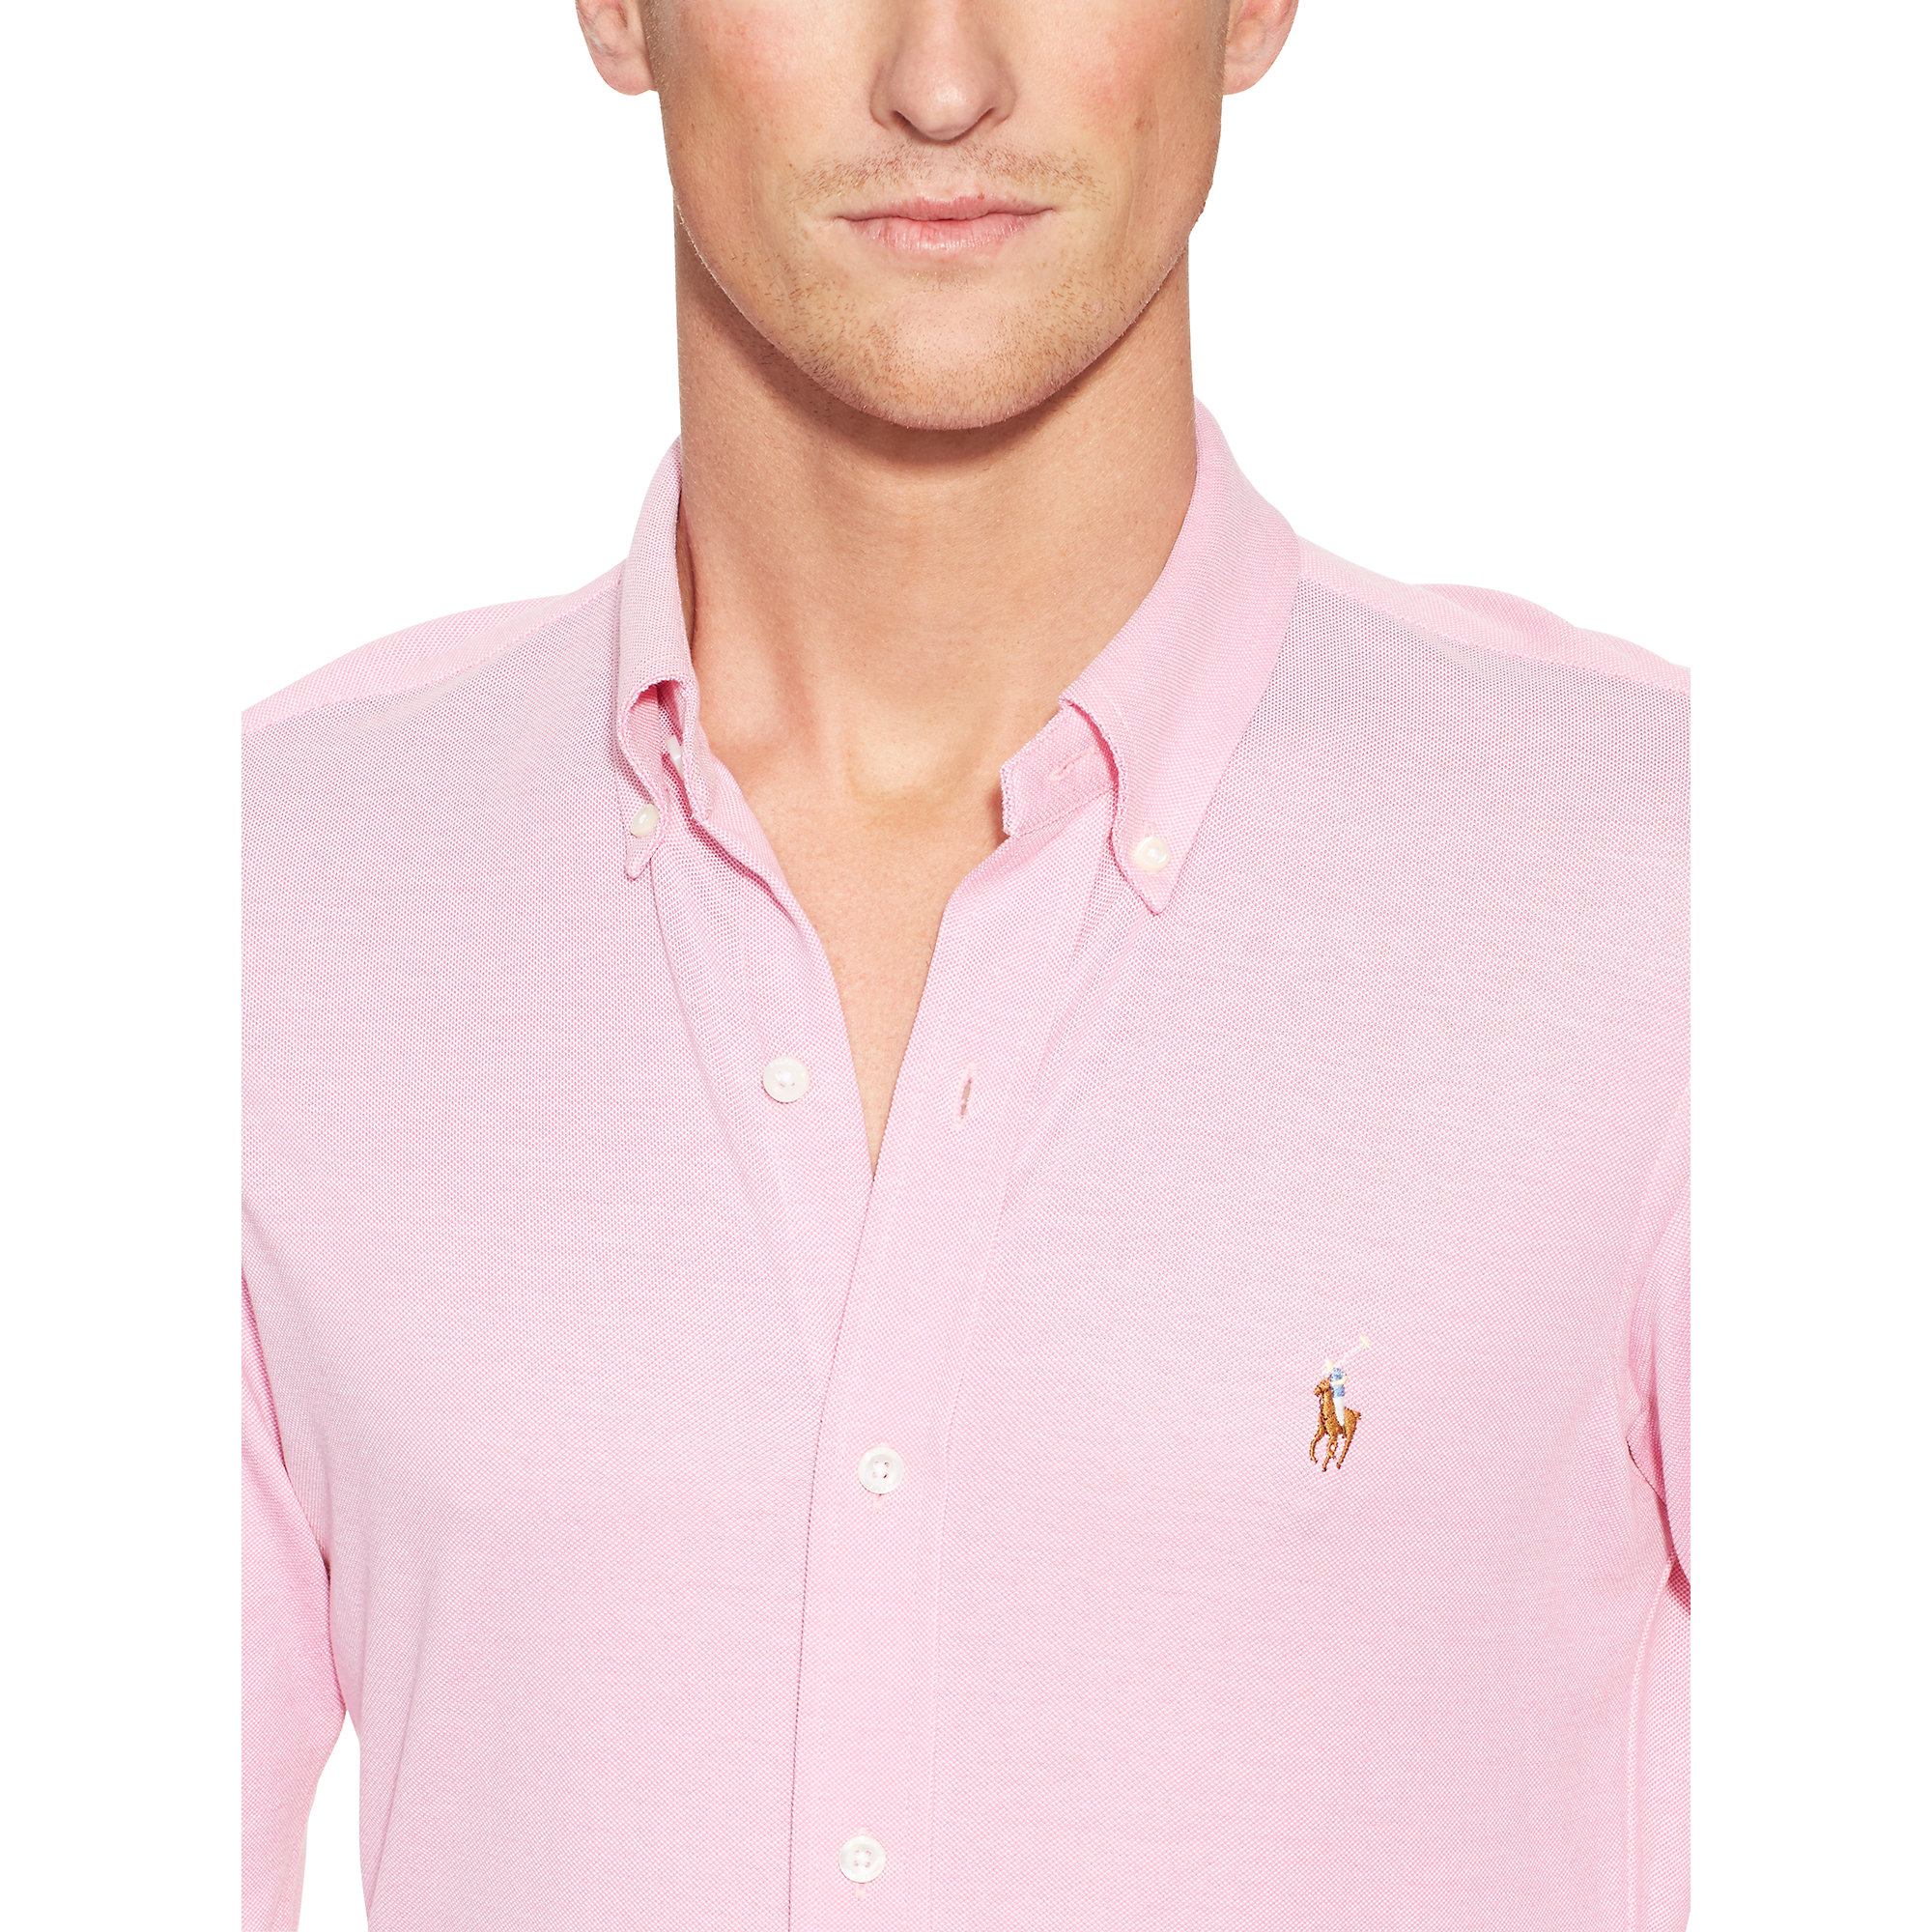 Polo Ralph Lauren Slim-fit Knit Oxford Shirt in Pink for Men - Lyst